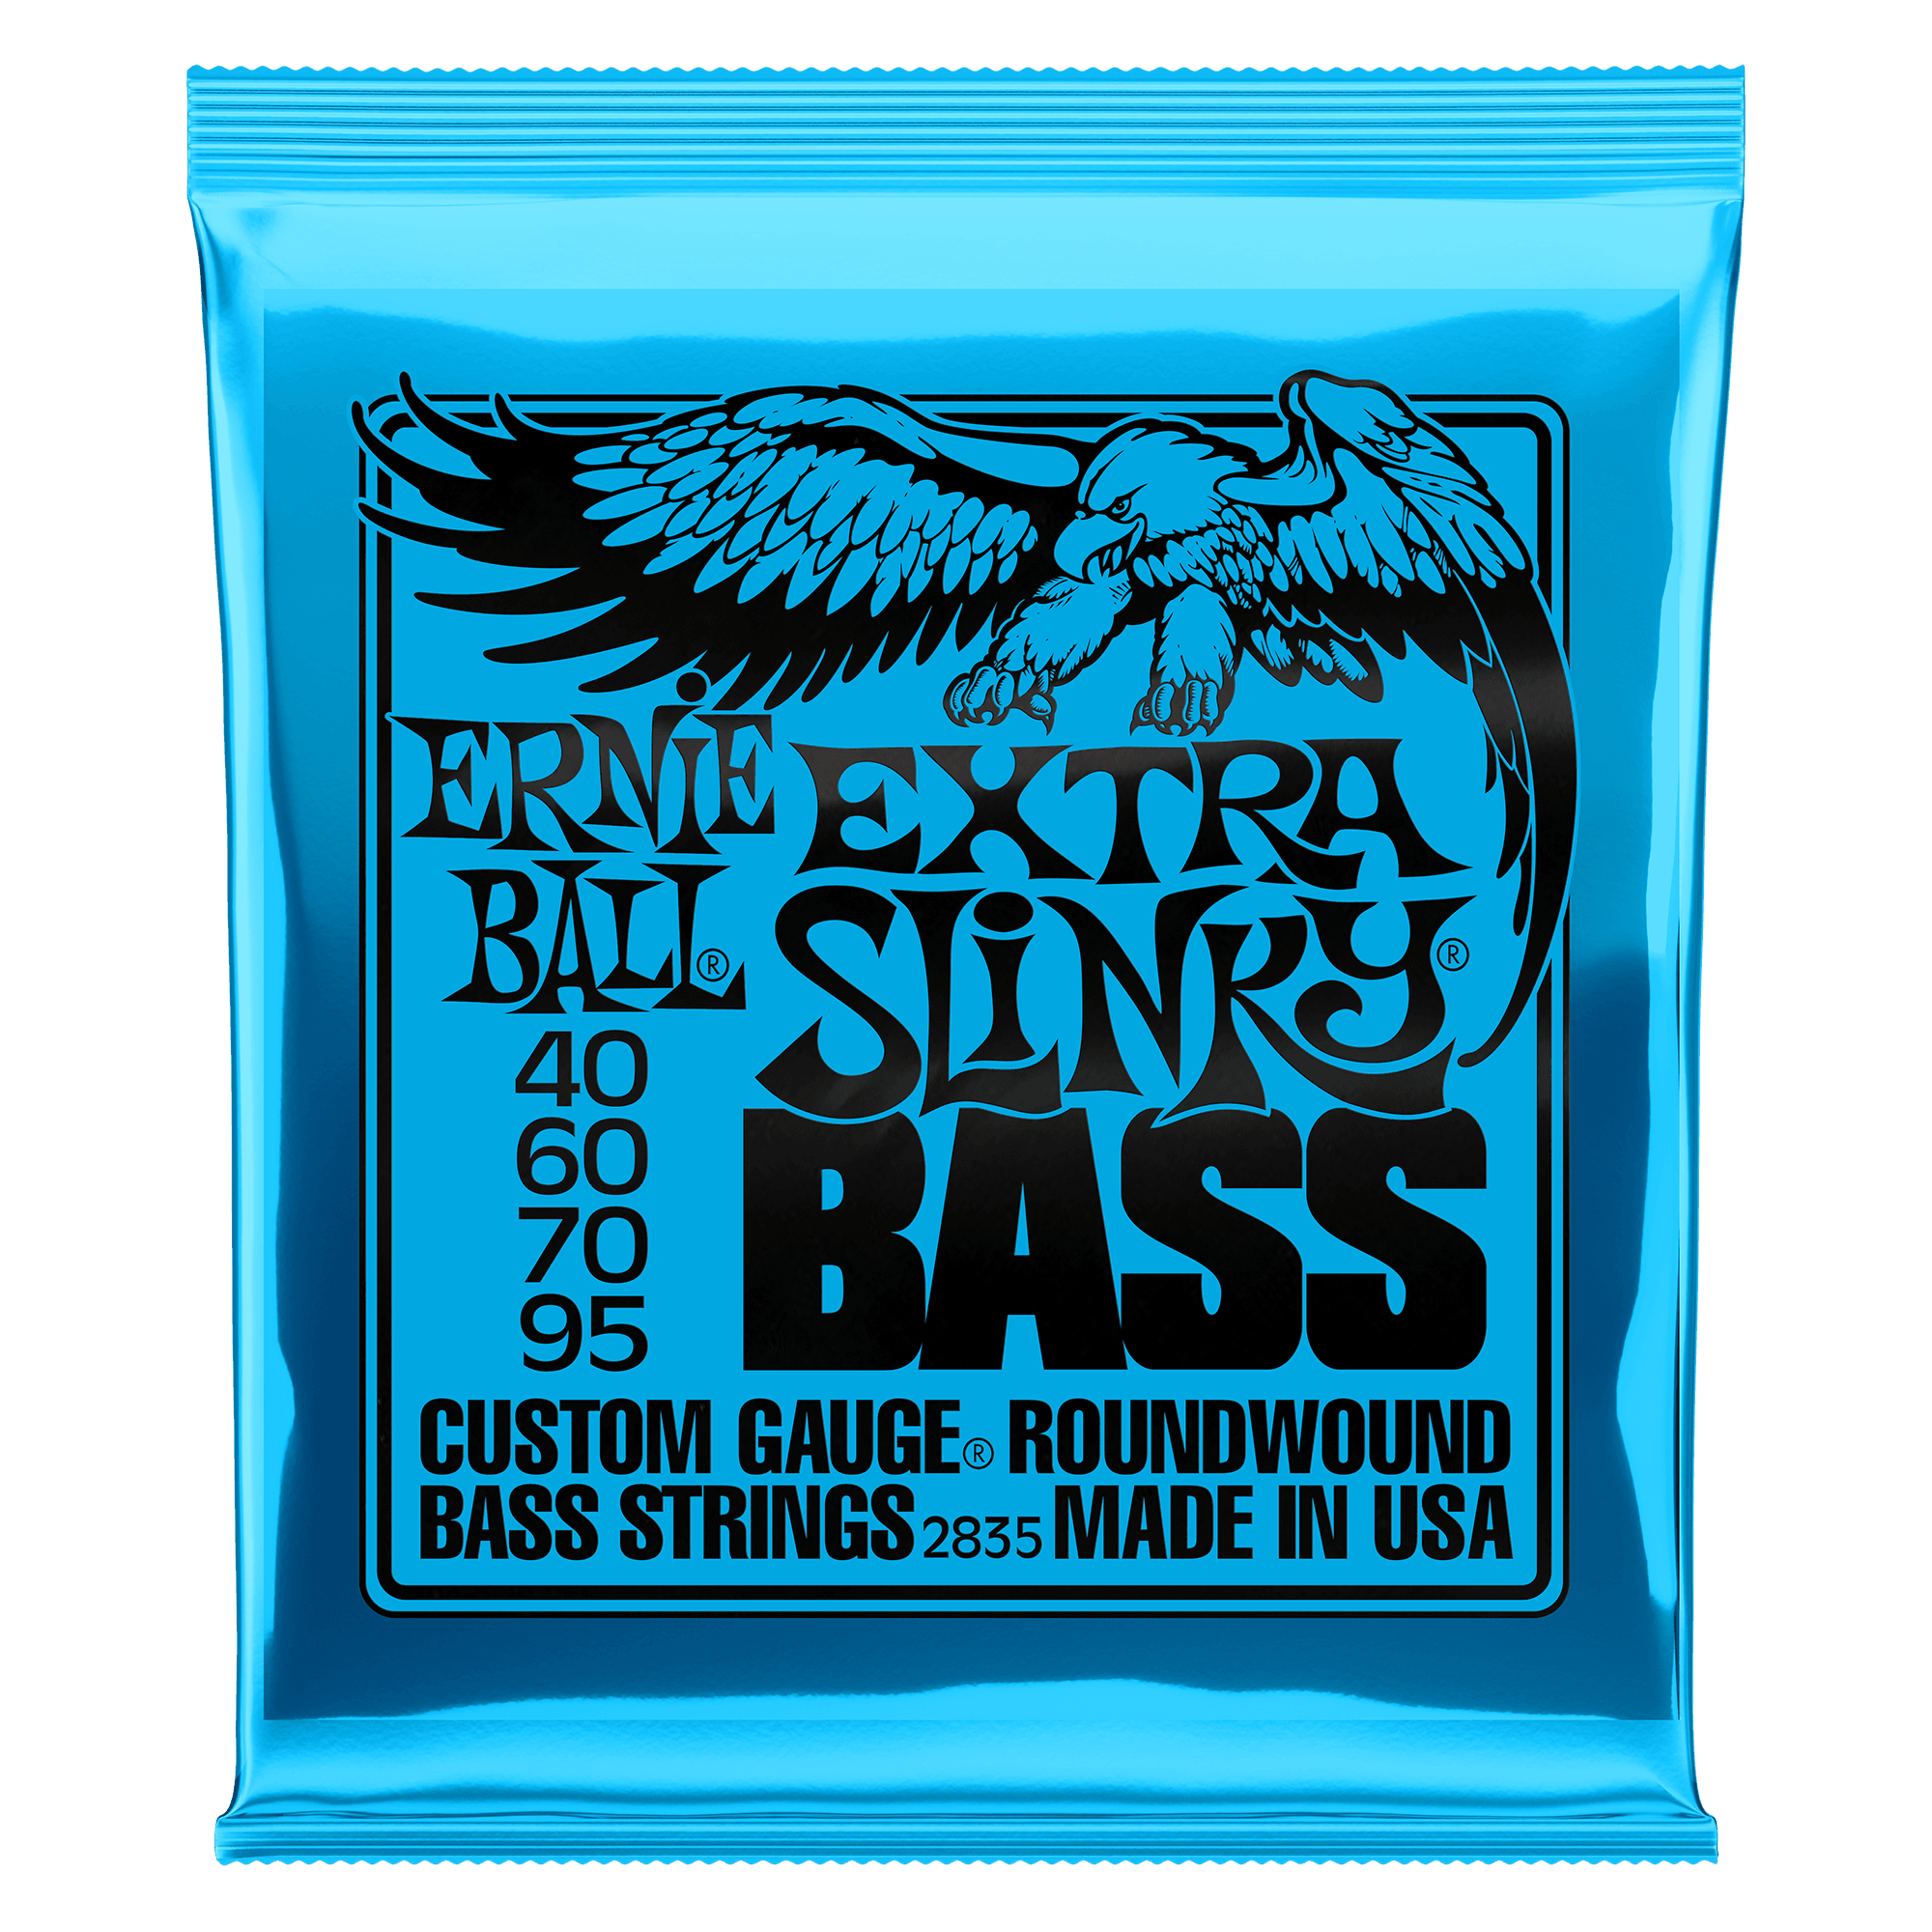 Ernie Ball - Electric Bass Guitar Strings Set 40-95 Extra Slinky Nickel Wound 2835 - Strings - Bass by Ernie Ball at Muso's Stuff